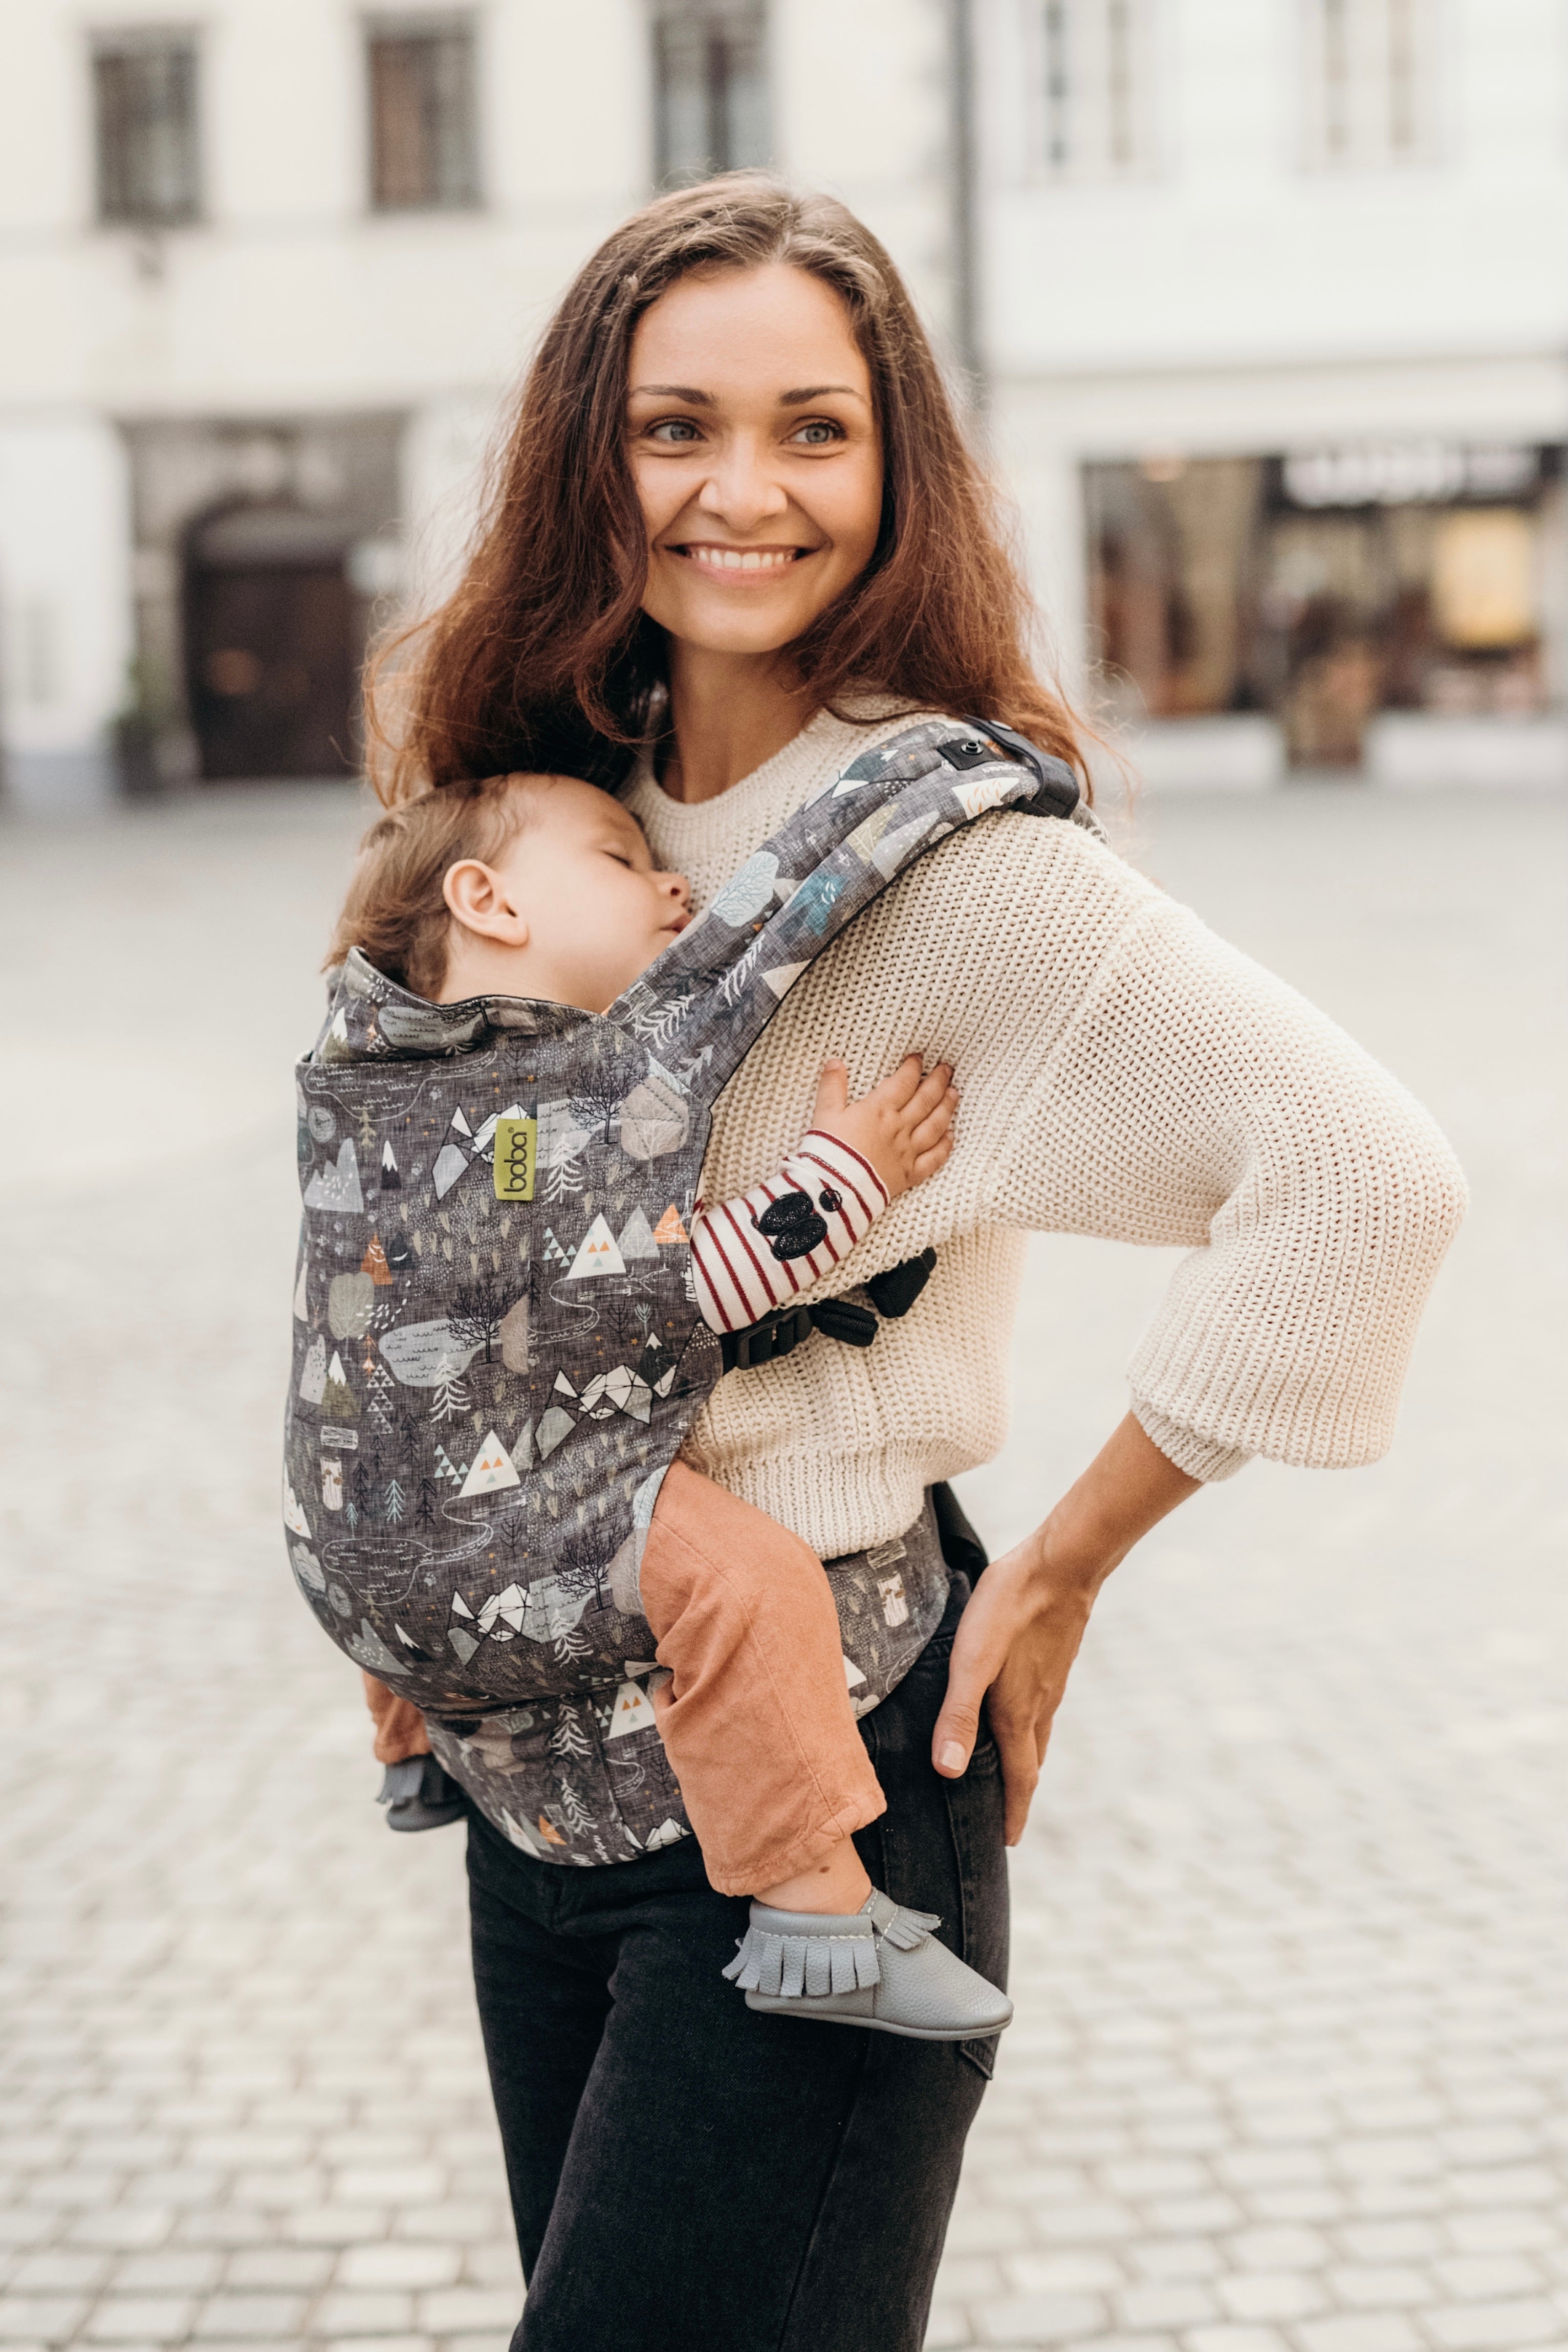 Boba classic baby carrier Max's Map. Our streamlined soft structured baby carrier is designed to go and grow with your little one. This ergonomic front facing baby carrier is ready to use from infant to toddler.